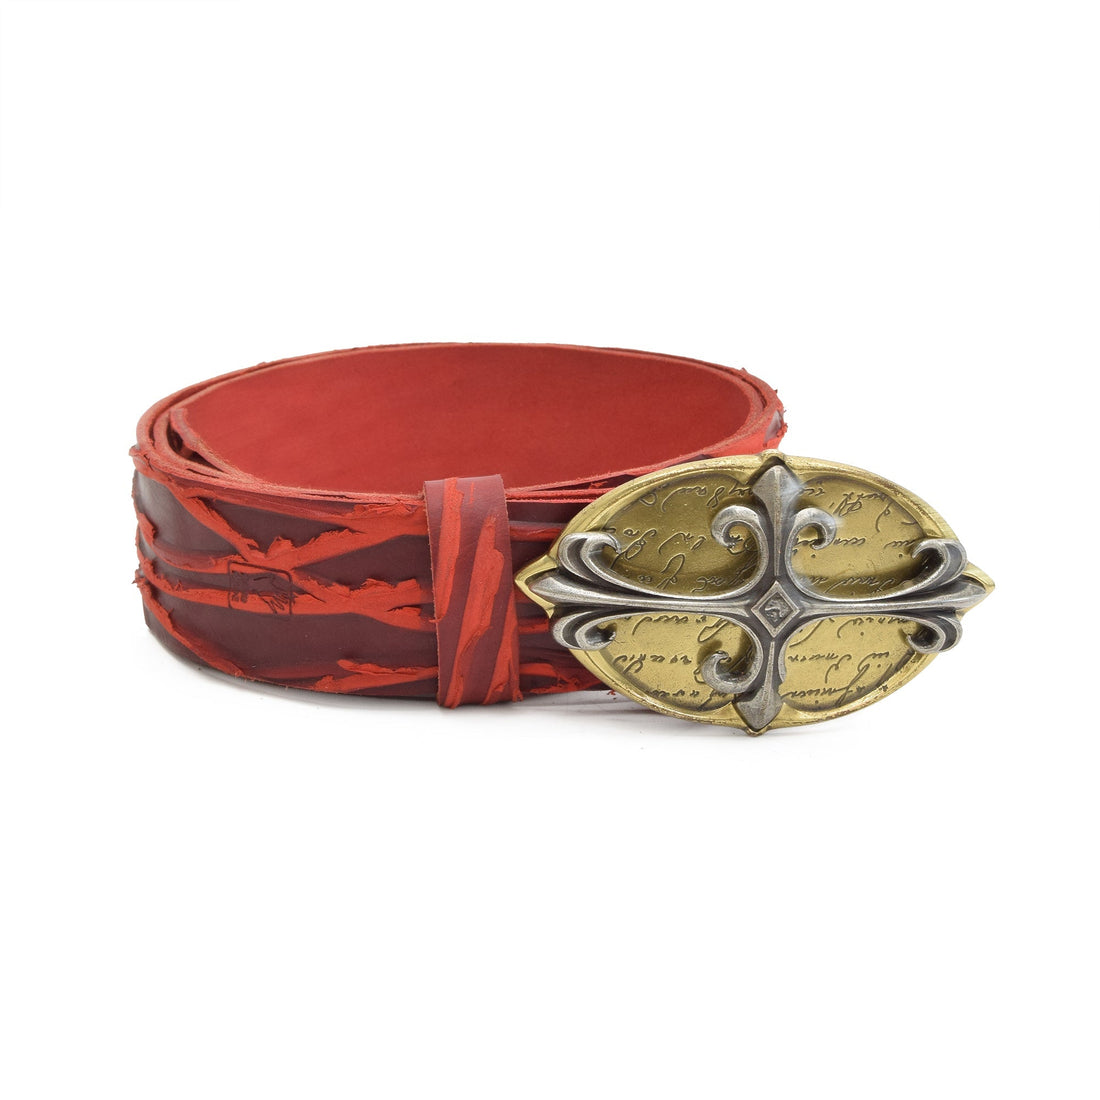 Aelithra Leather Belt Red with Changeable Buckle - 80 / Belts Zengoda Shop online from Artisan Brands